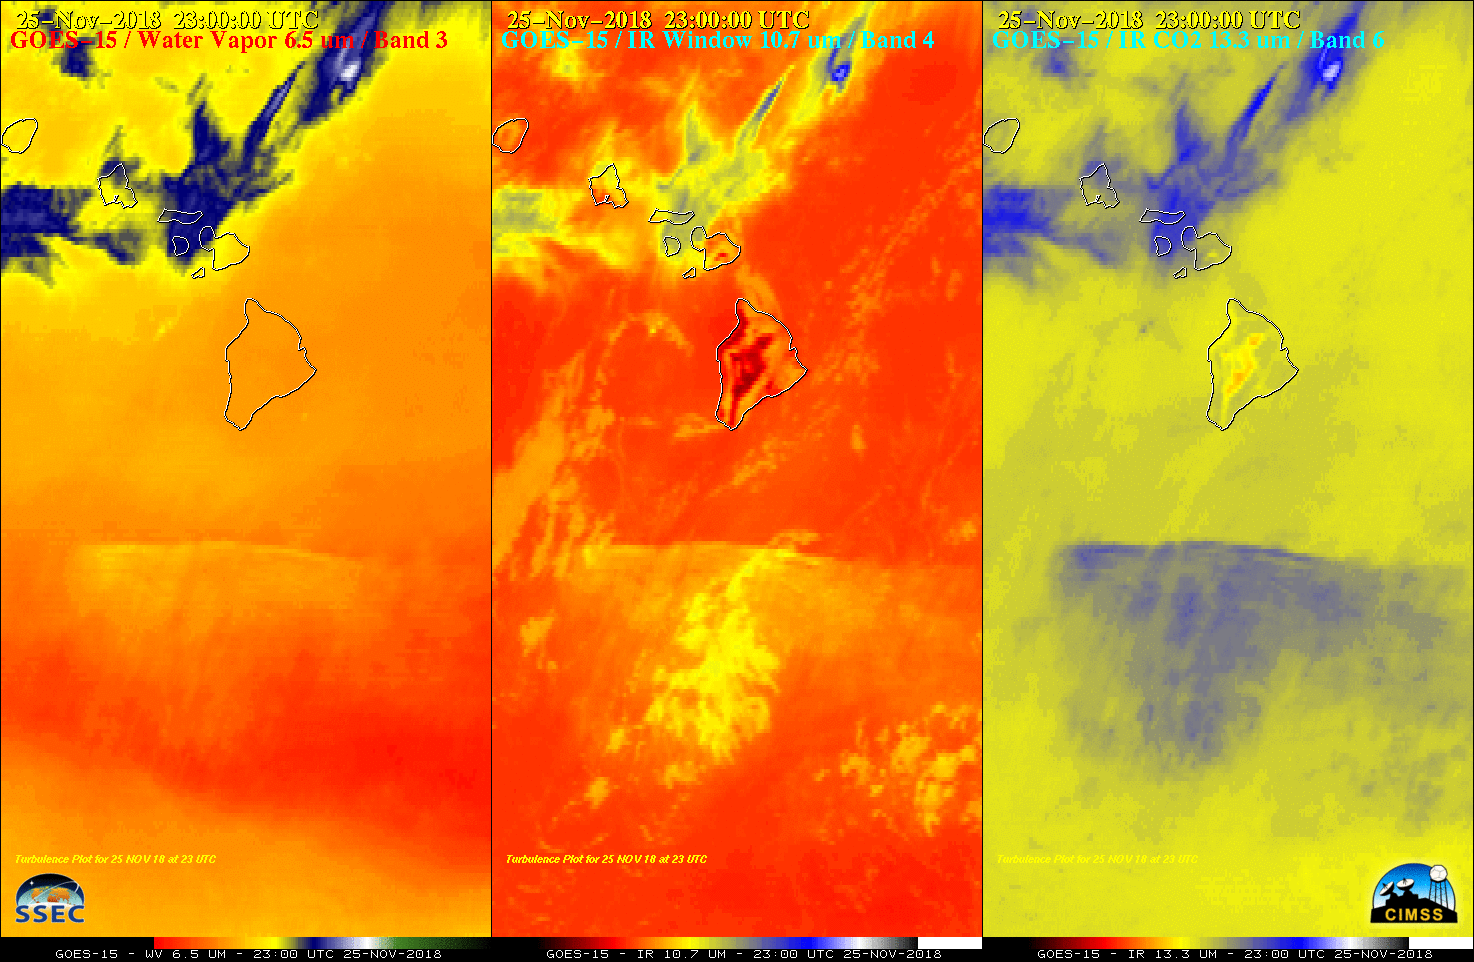 GOES-15 Water Vapor (6.5 µm, keft), Infrared Window (10.7 µm, center) and Infraered CO2 (13.3 µm, right) images [click to play animation | MP4]